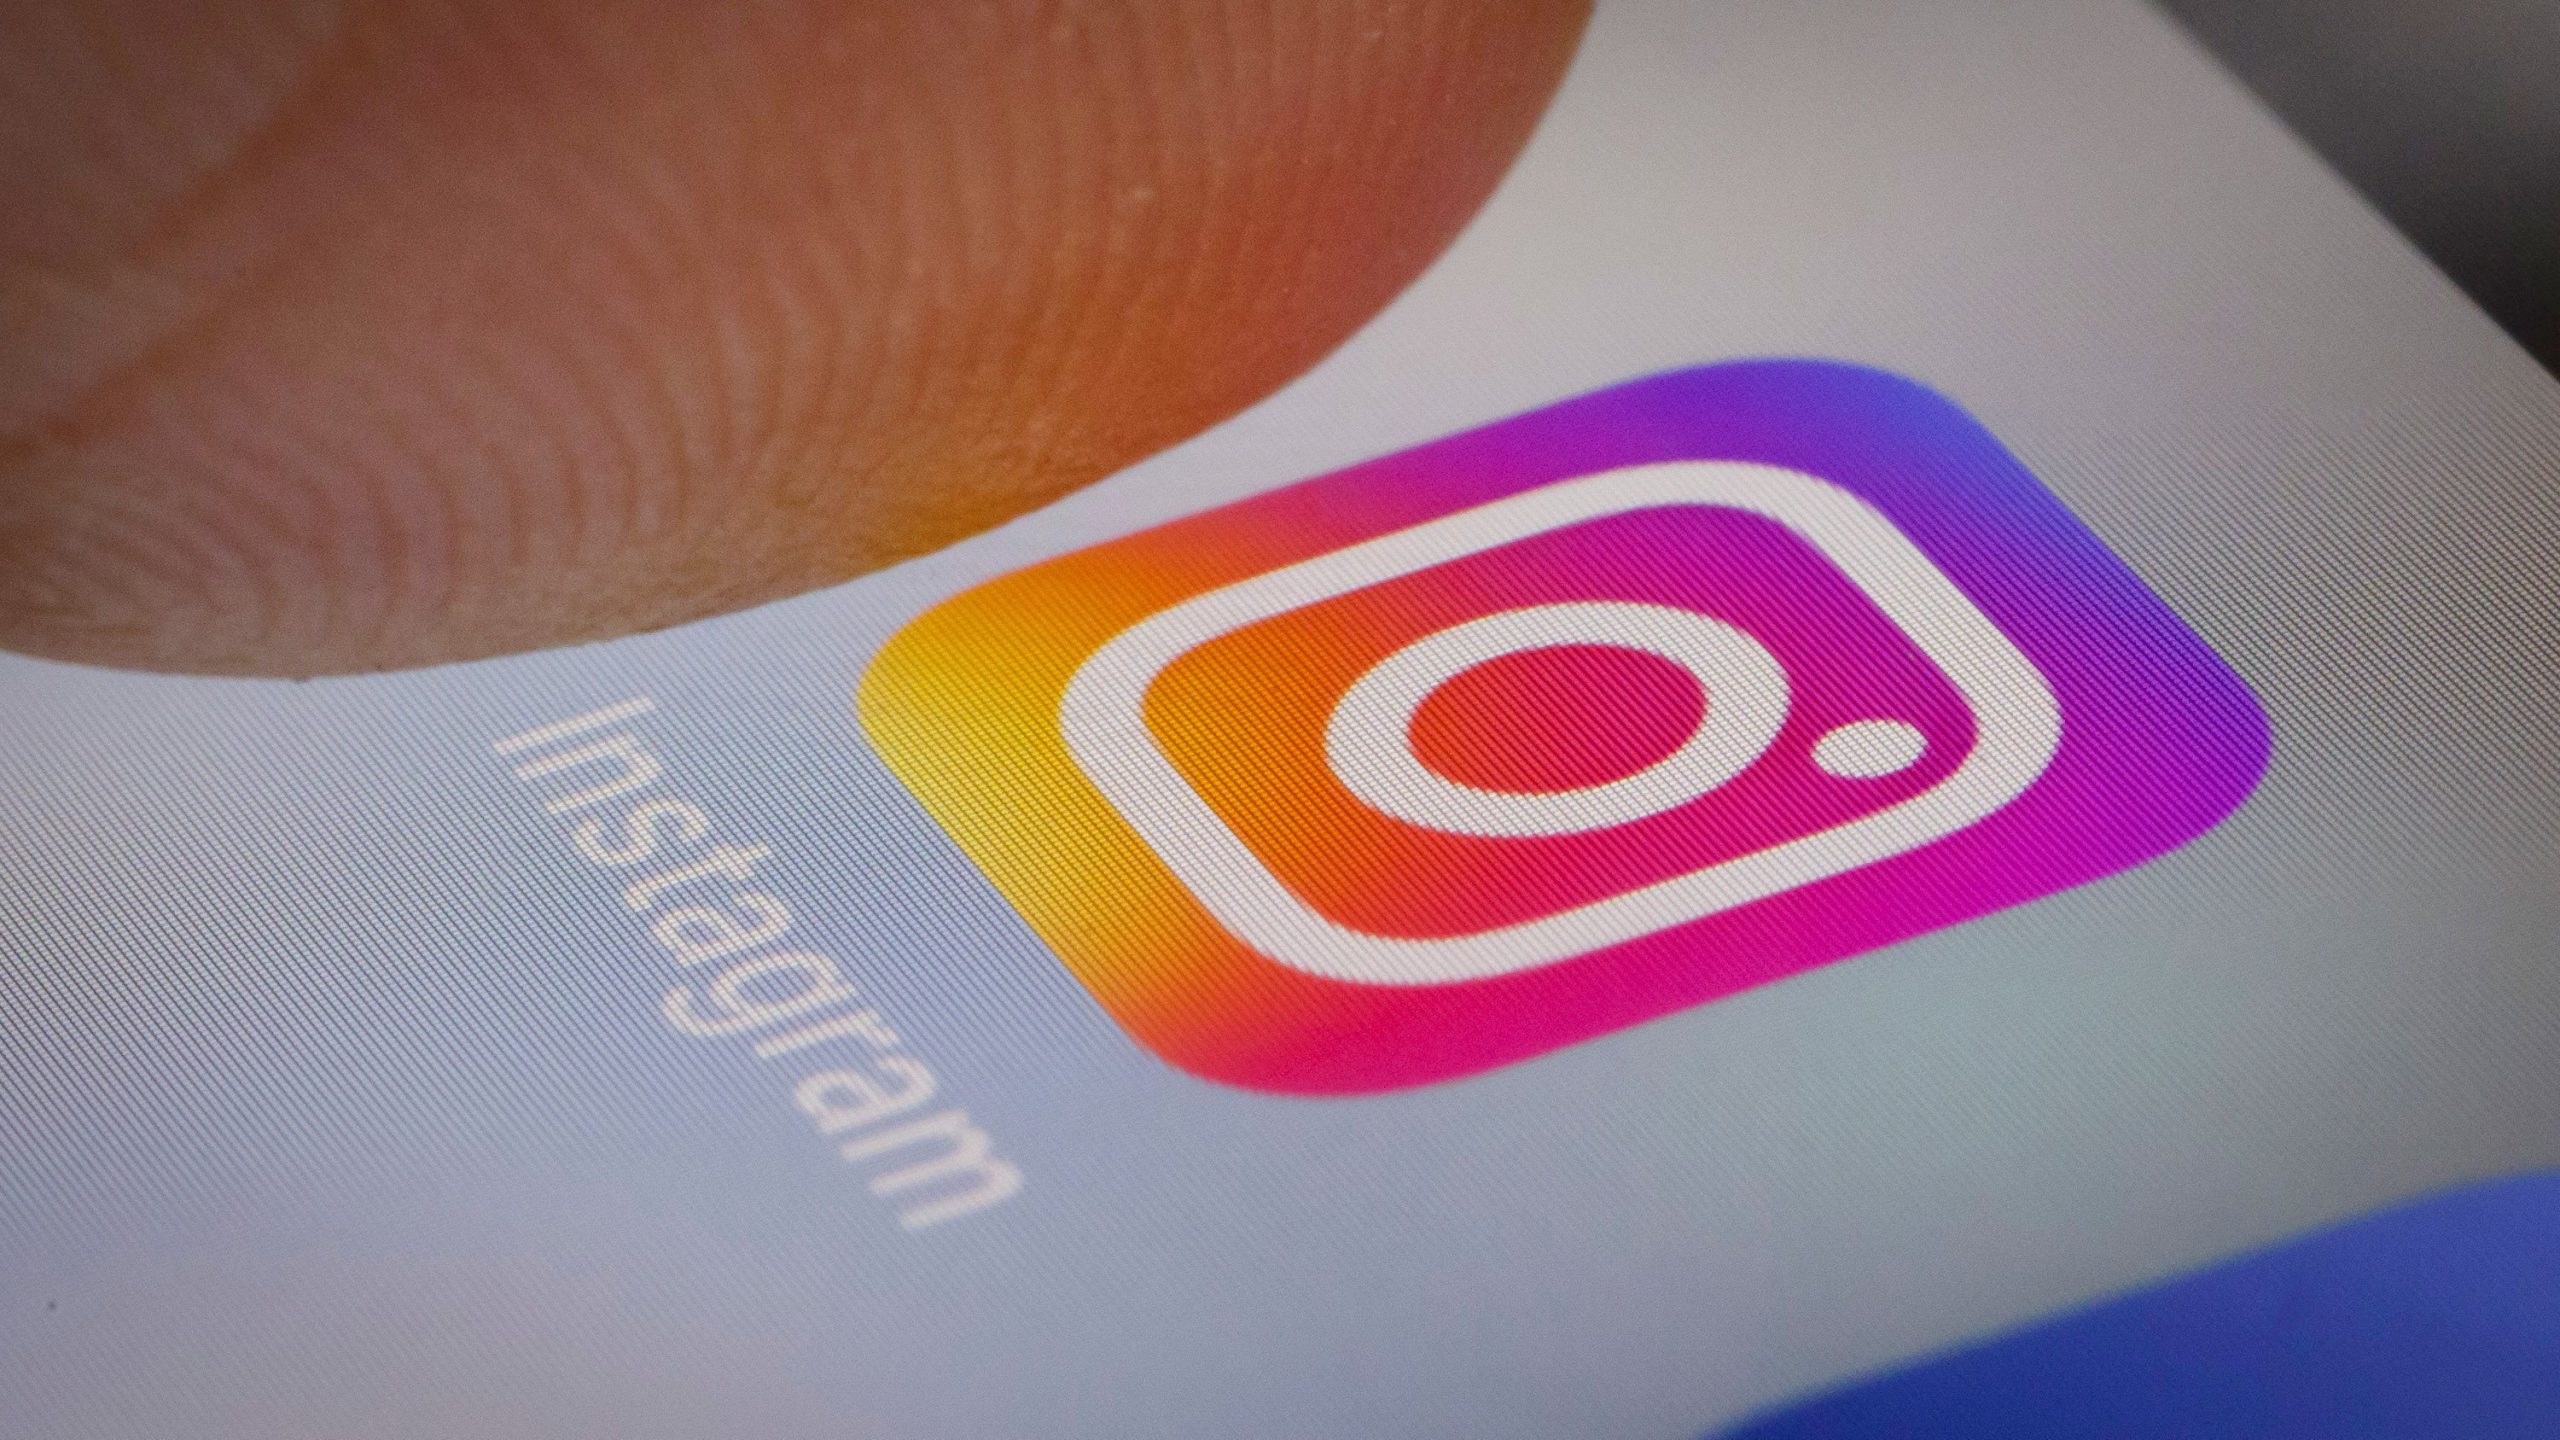 Mother among 4 arrested for attempting to sell babies on Instagram